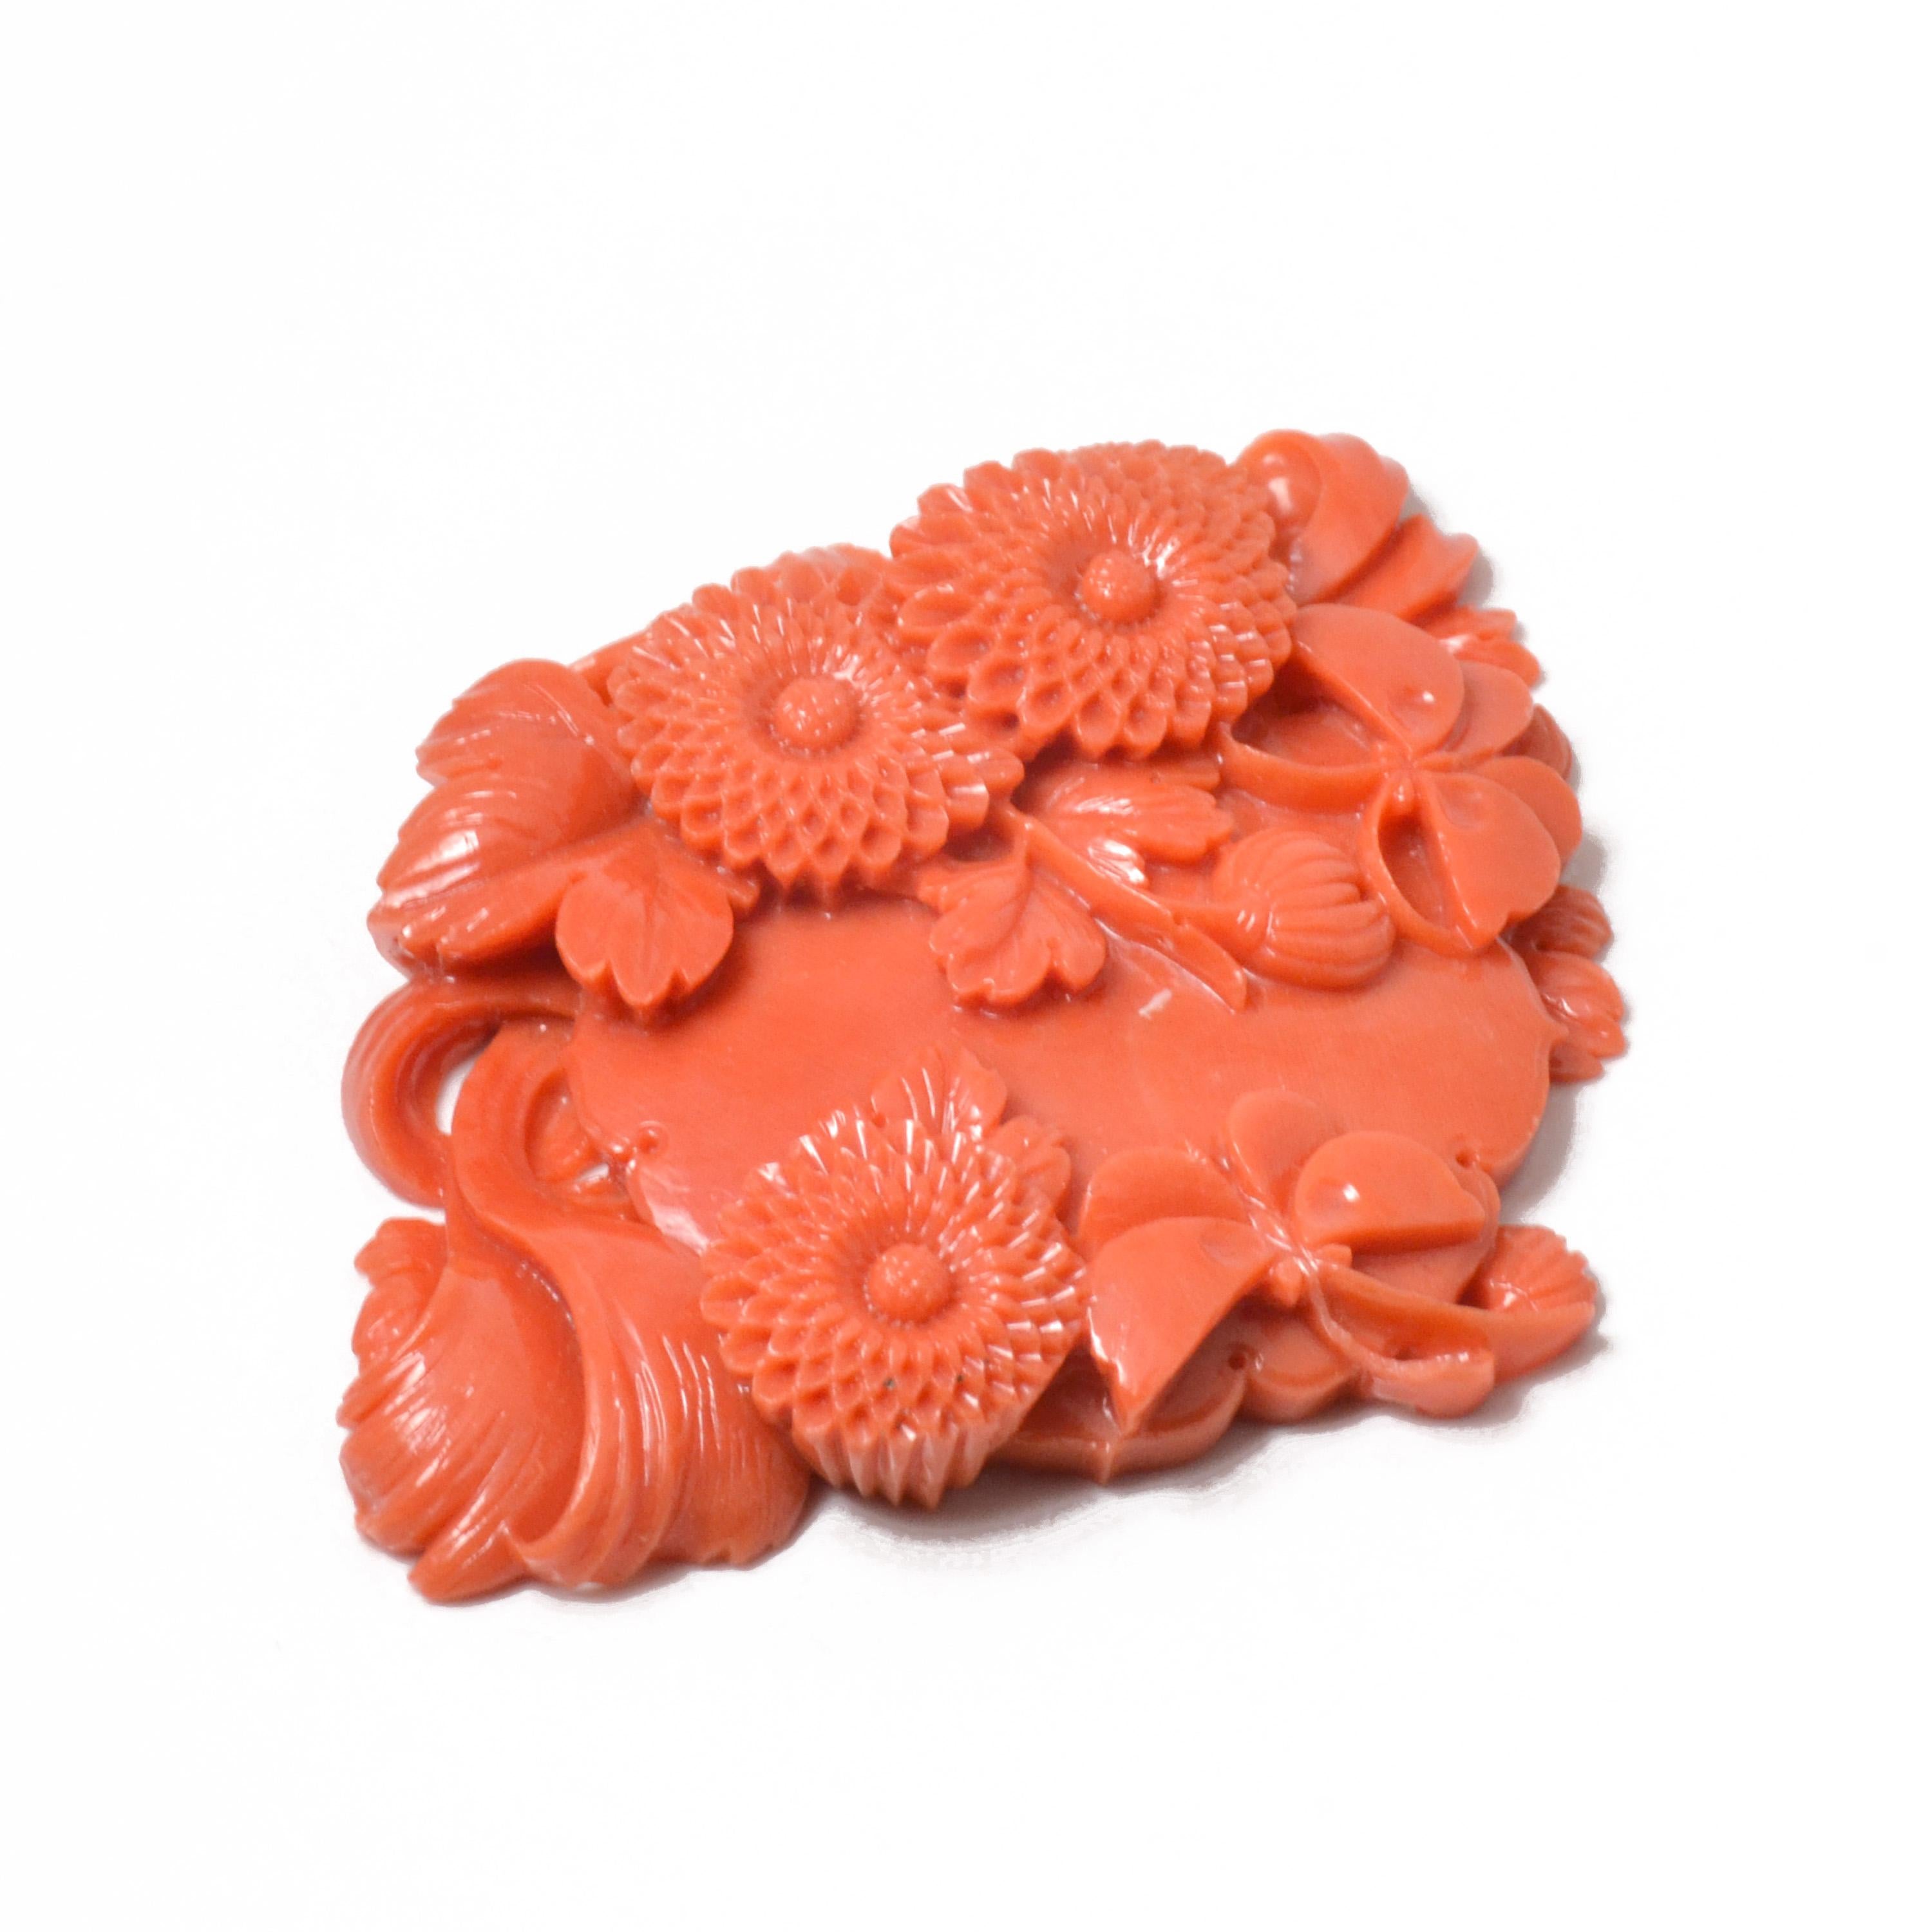 Mixed Cut Vintage Japanese Momoiro Sango Carved Coral Plate Butterflies and Chrysanthemum For Sale